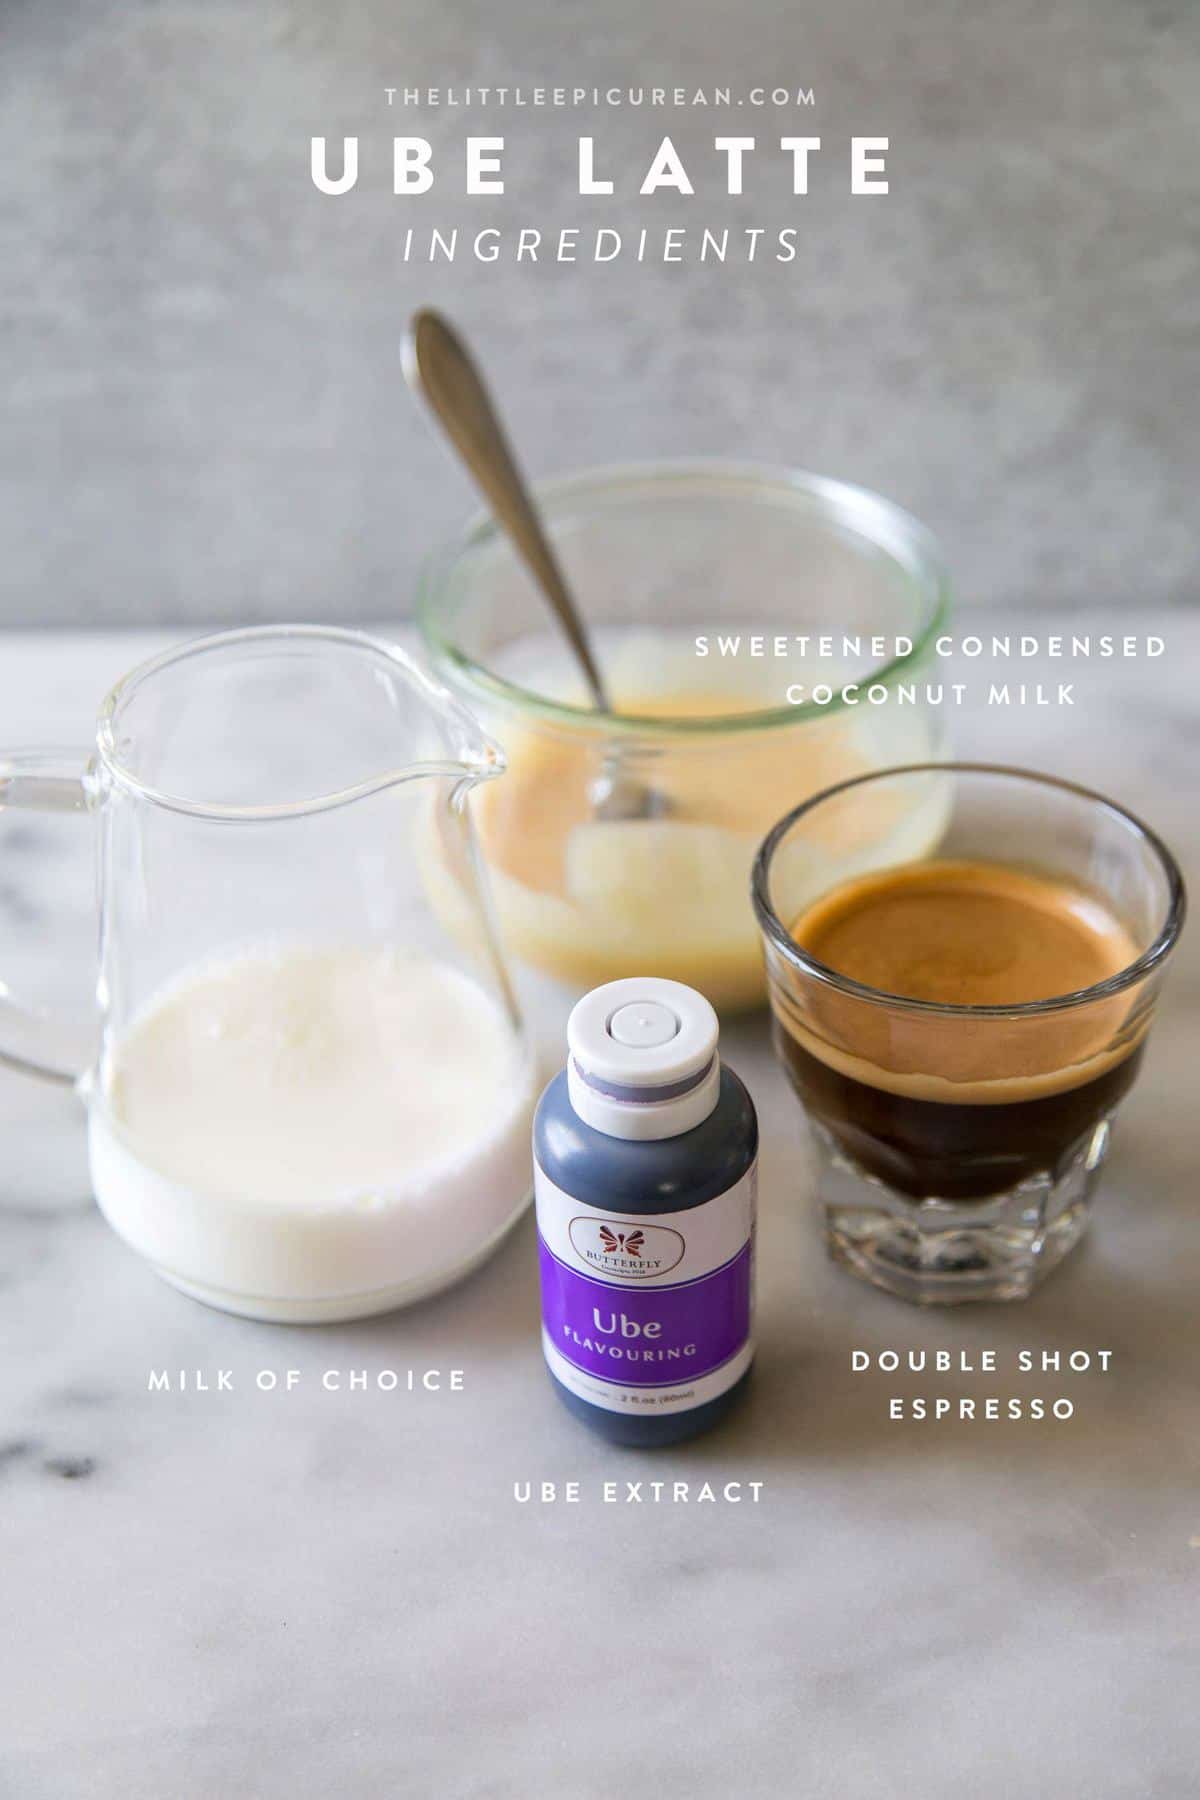 image of four ingredients needed to make ube latte including milk, sweetened condensed milk, ube extract, and espresso.